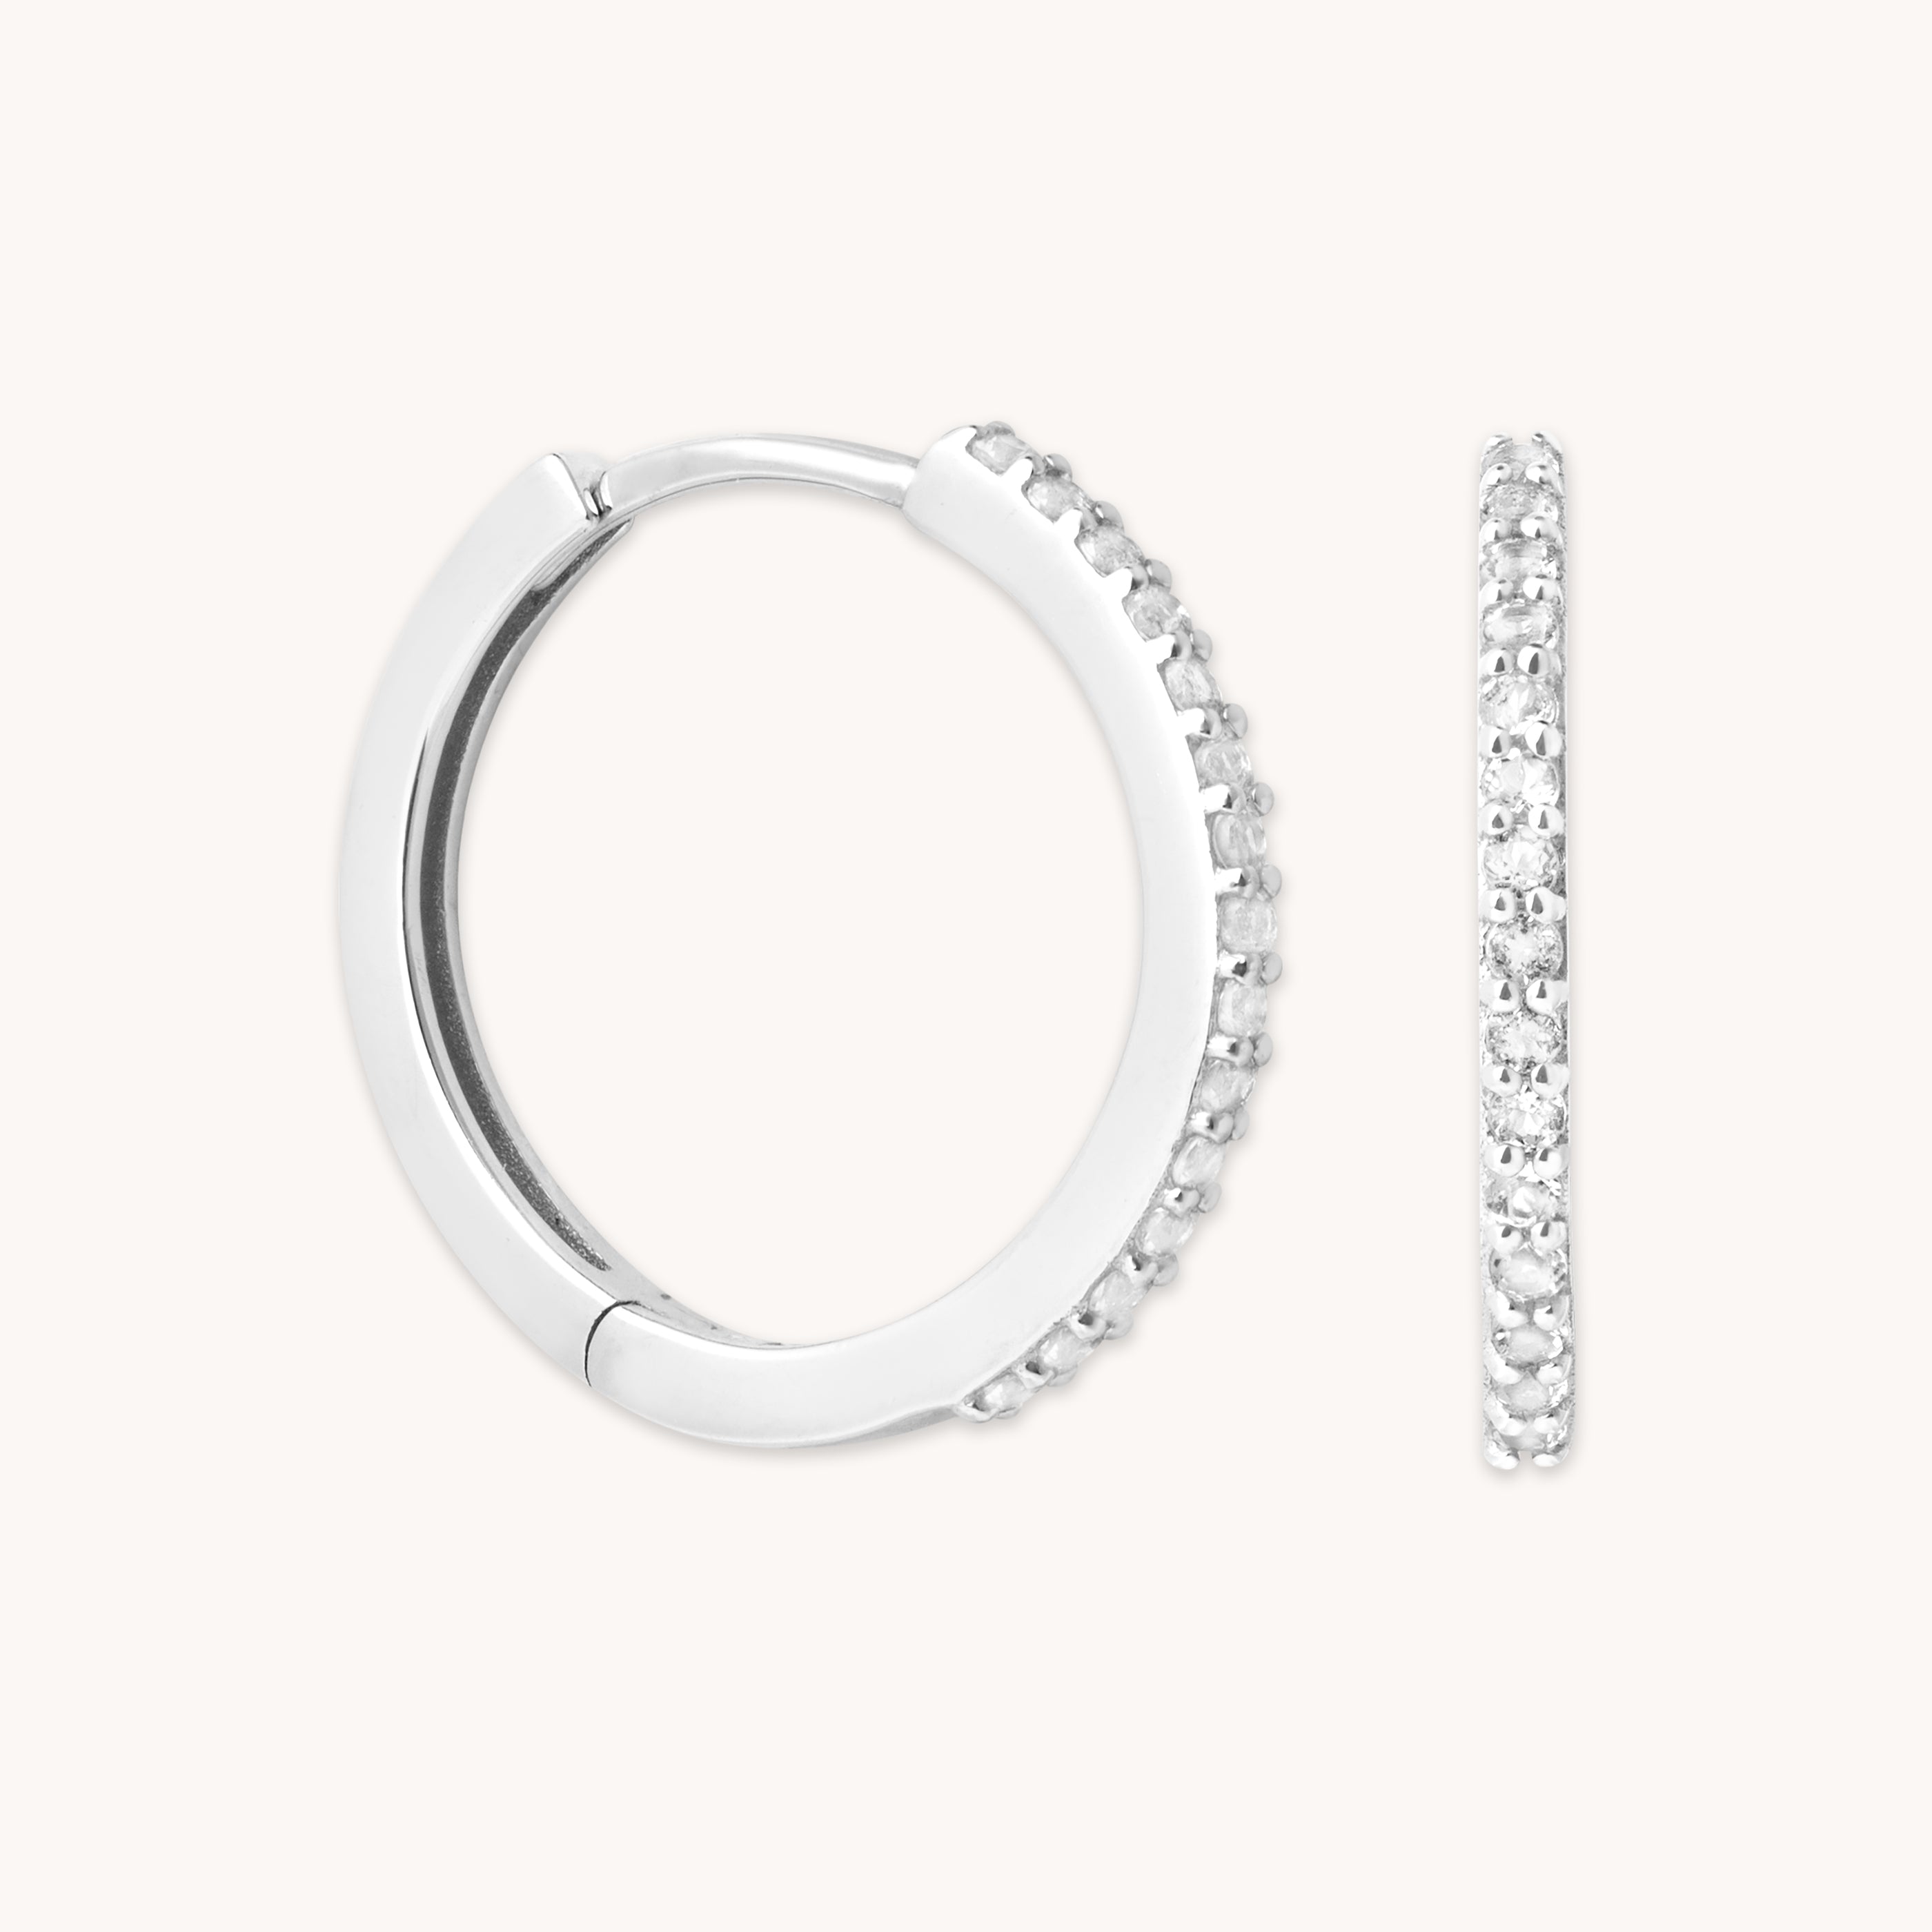 Topaz 12mm Hoops in Solid White Gold